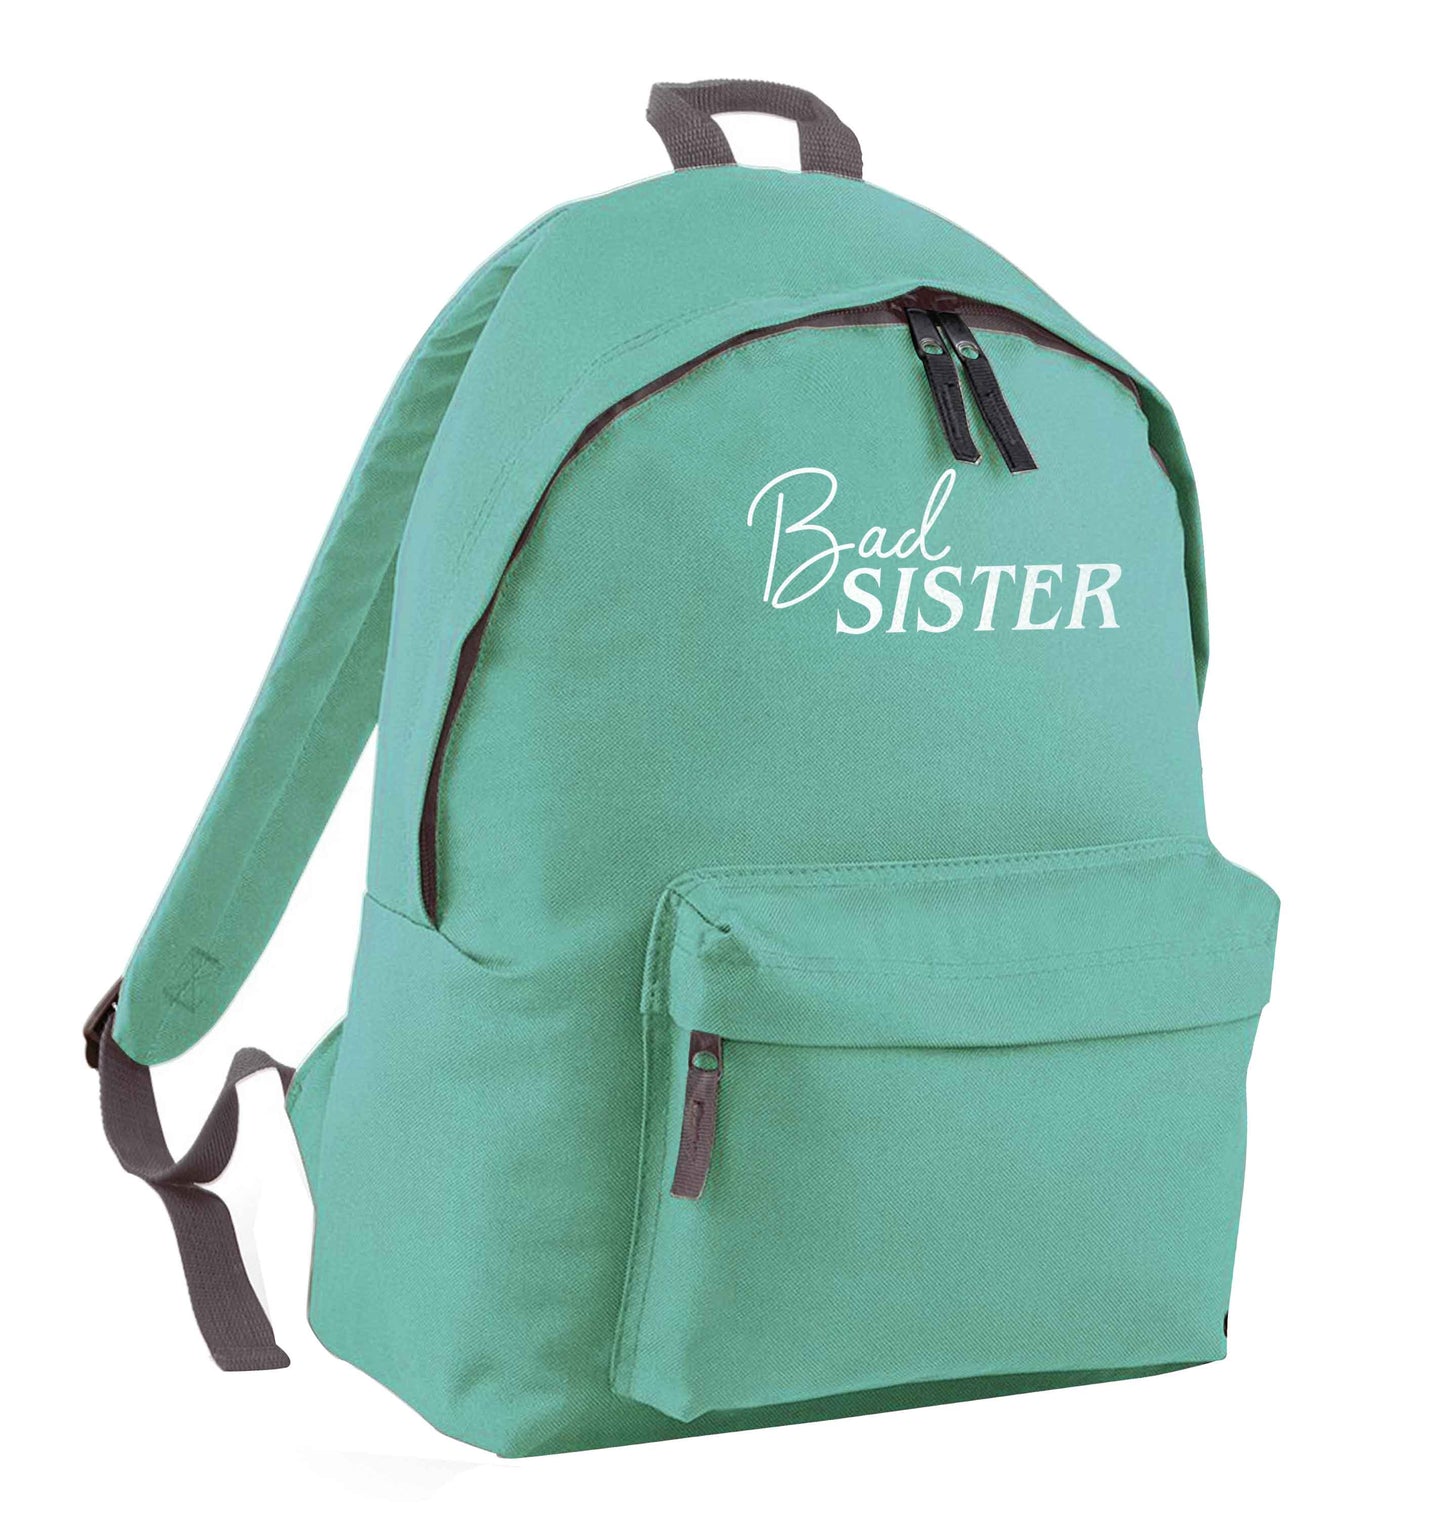 Bad sister mint adults backpack